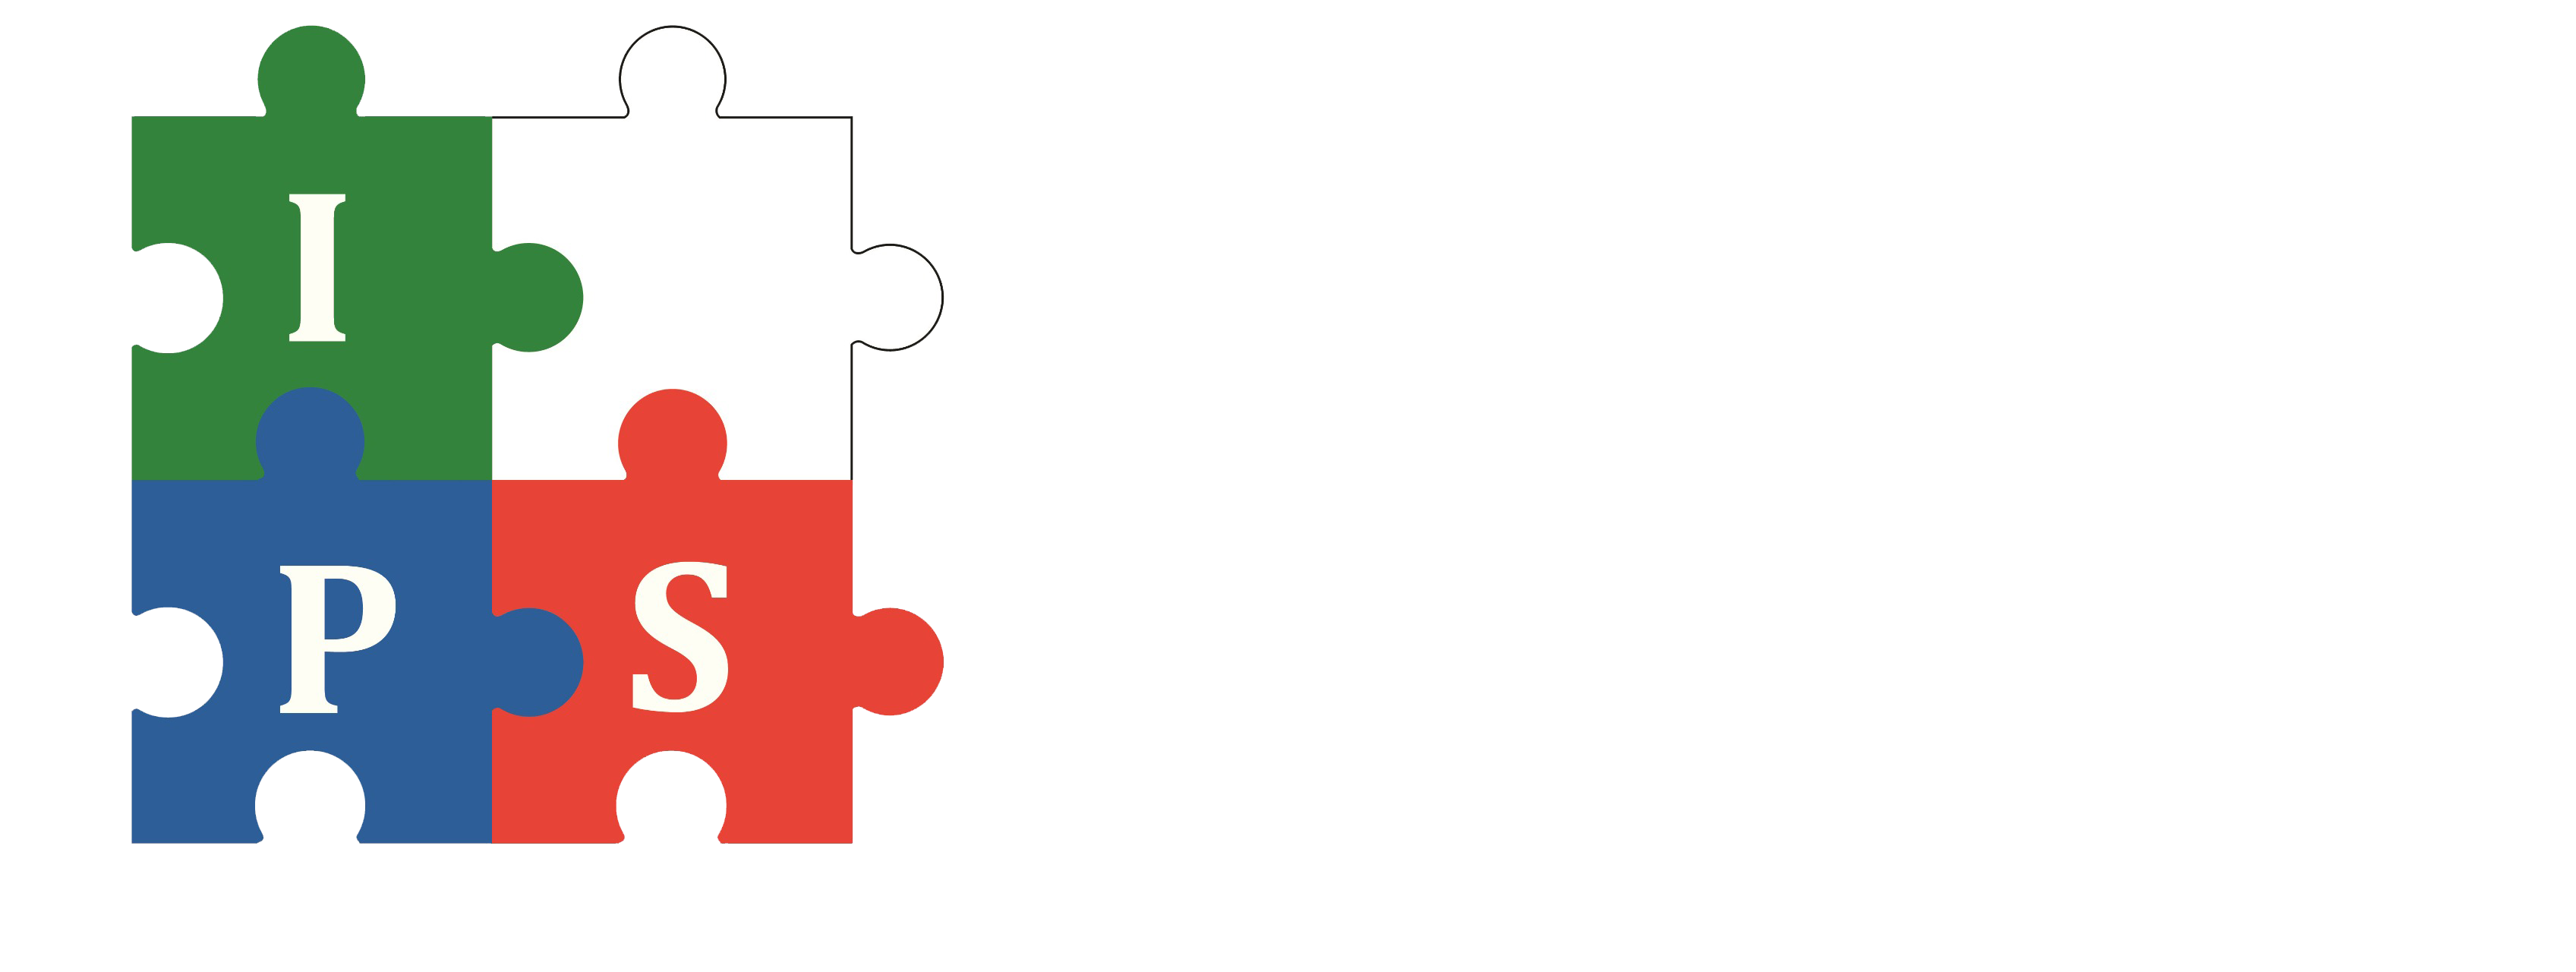 Integrated Parking Services